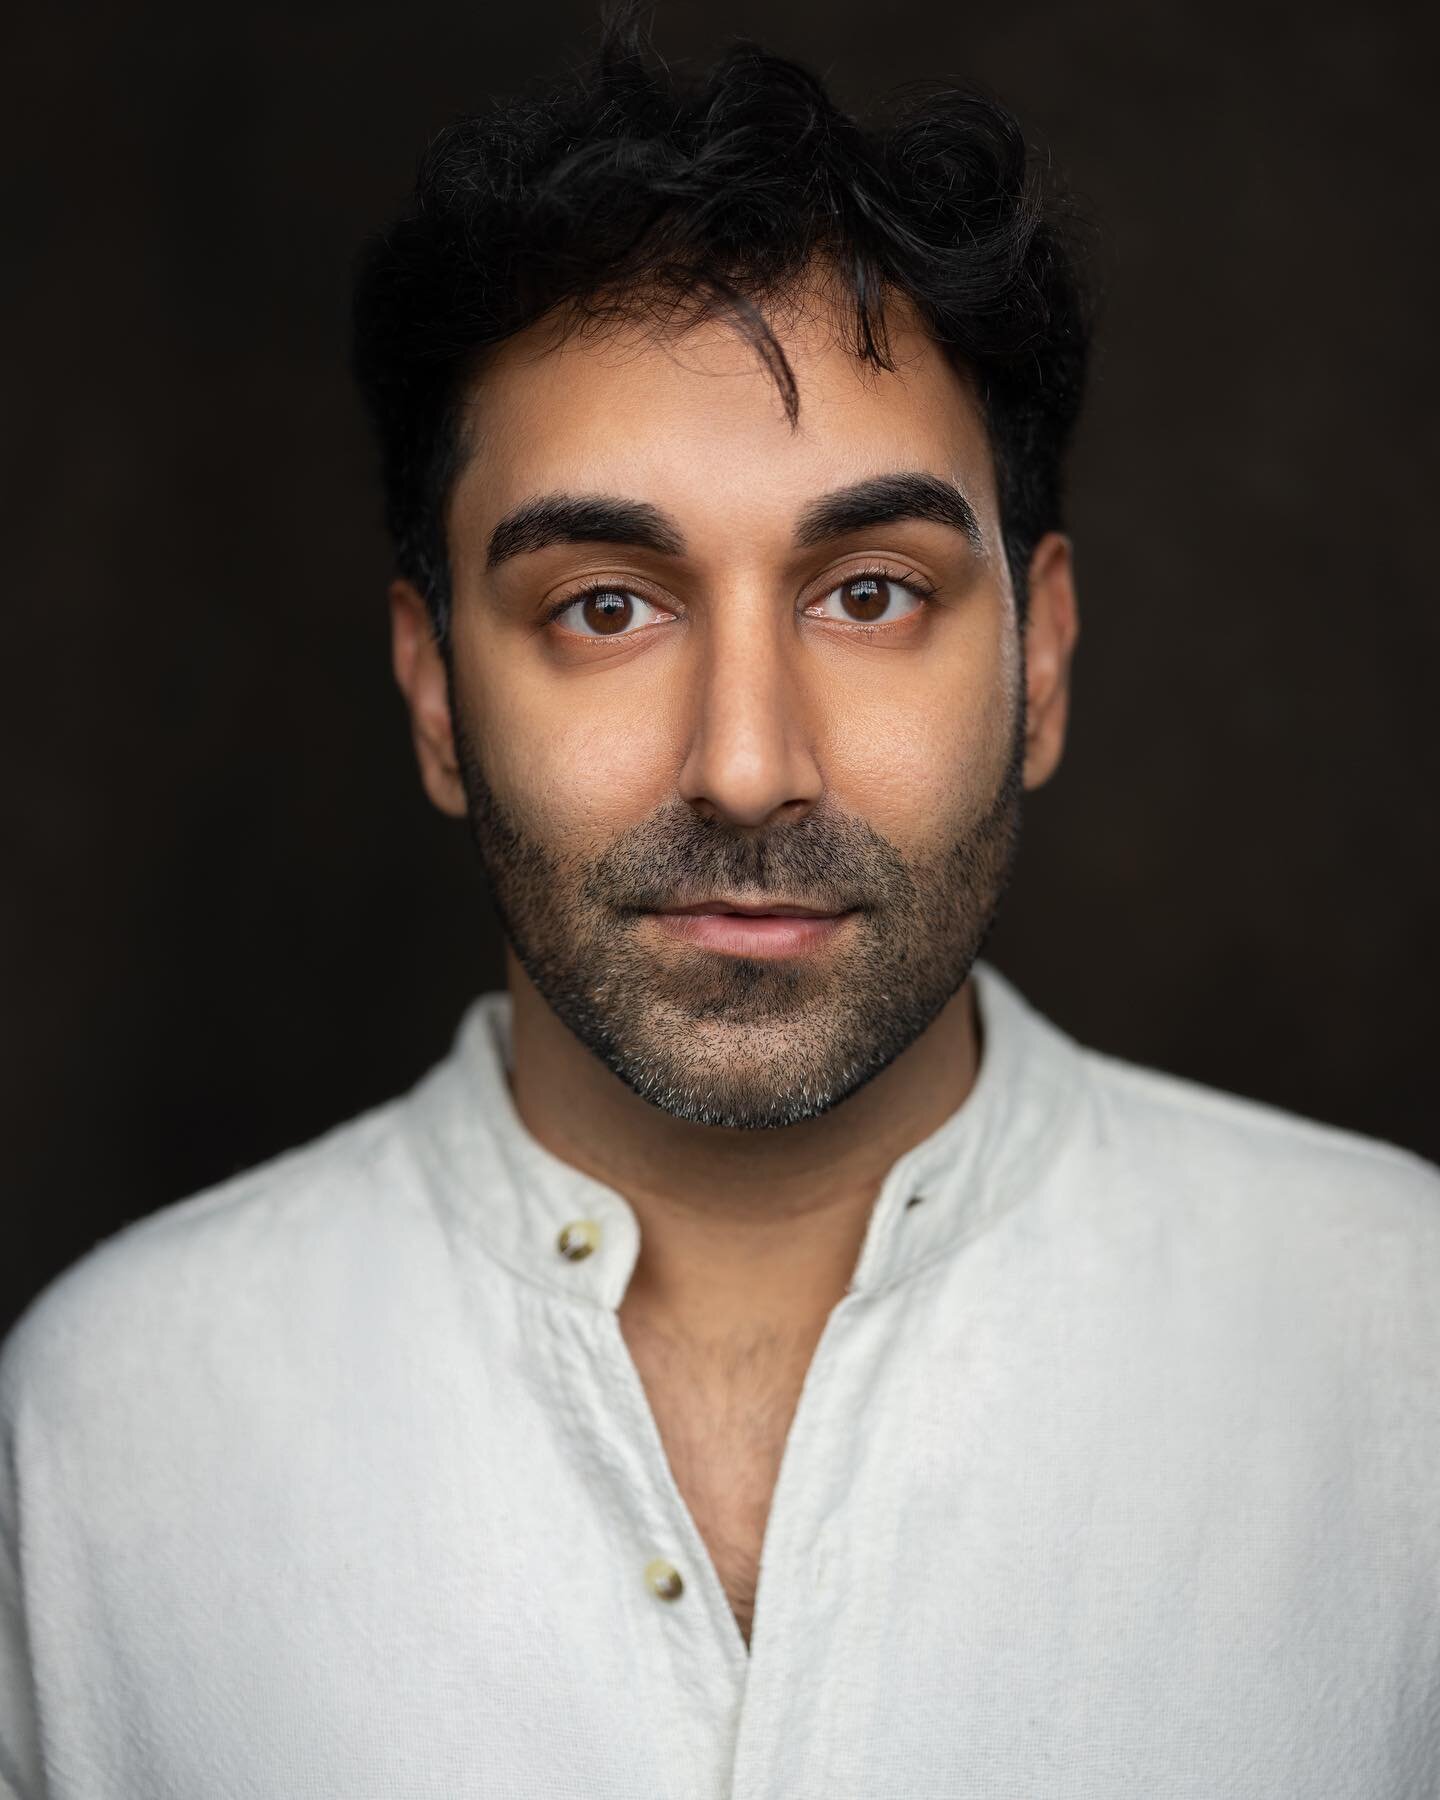 Introducing the wonderful, Shiv Rabheru (he/him)!

Shiv is queer British Indian Director and based in London, UK. He is currently working as a professional director with a passion for storytelling and collaborating with other artists. Shiv&rsquo;s ex